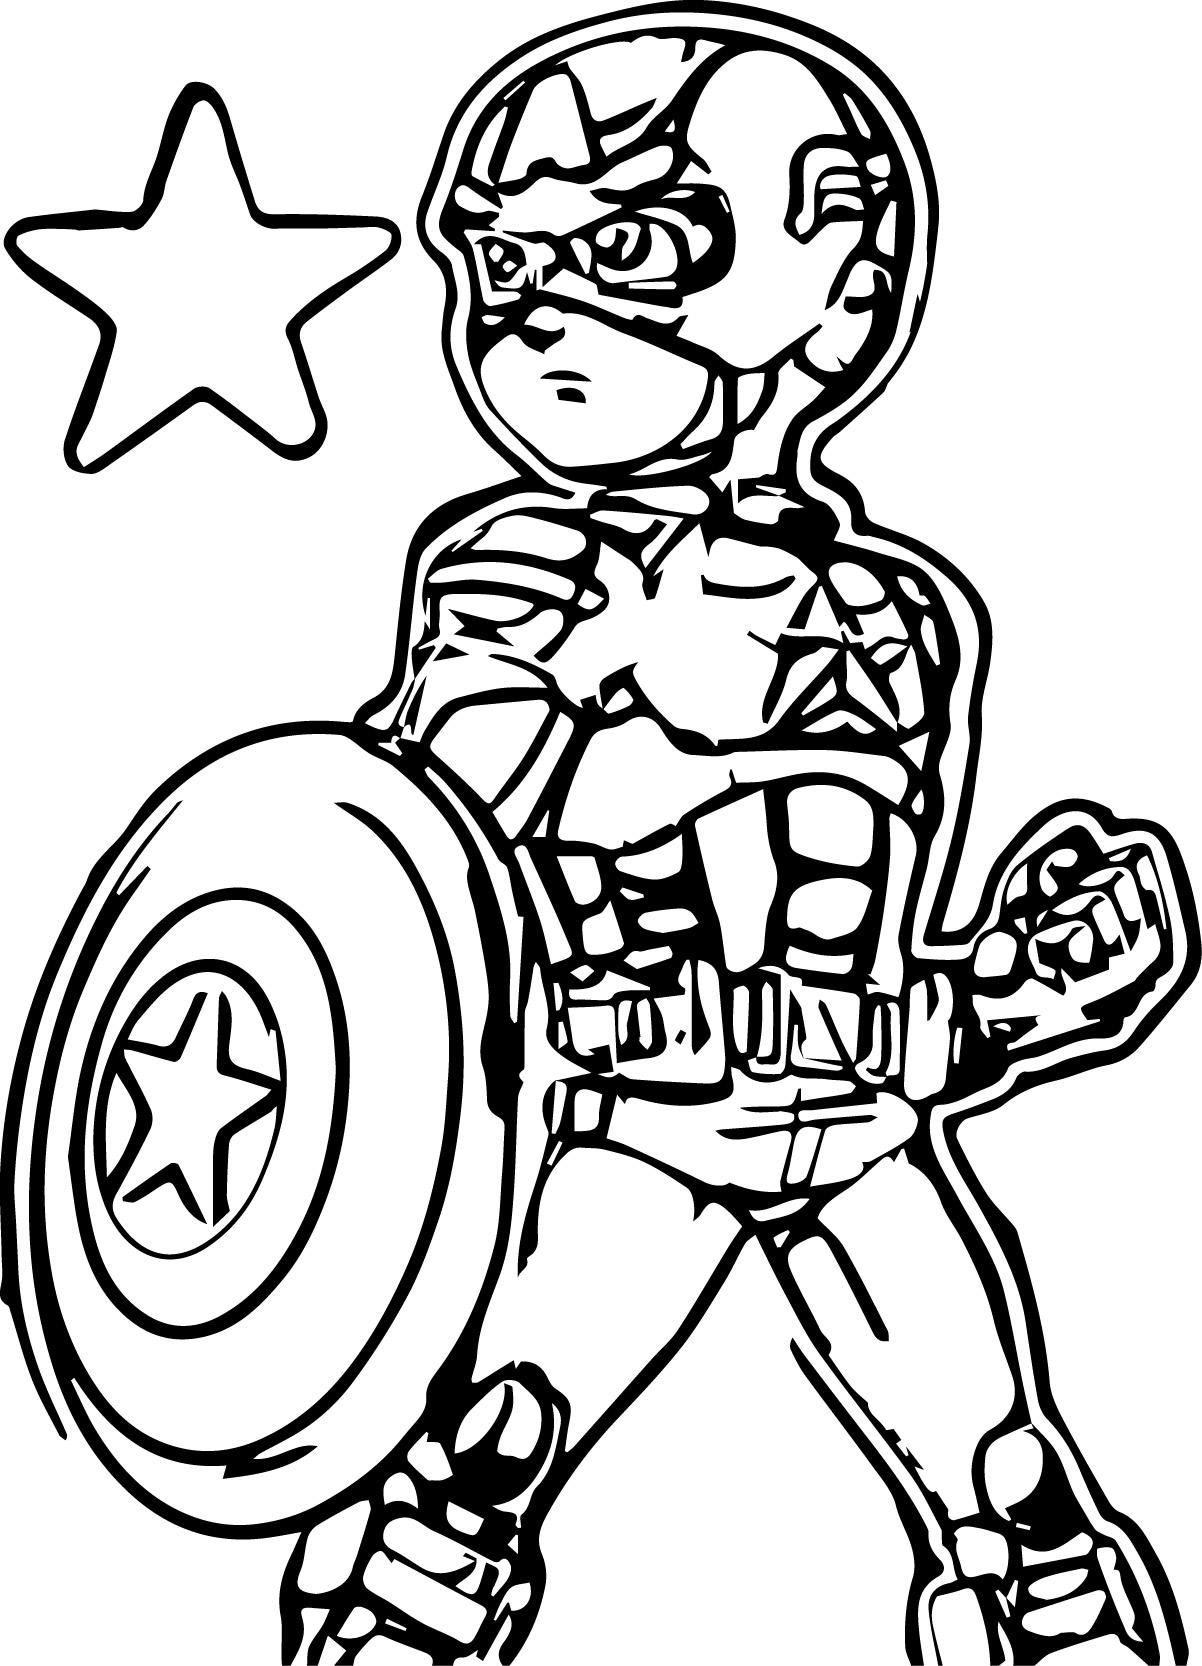 Captain America (Superheroes) – Free Printable Coloring Pages